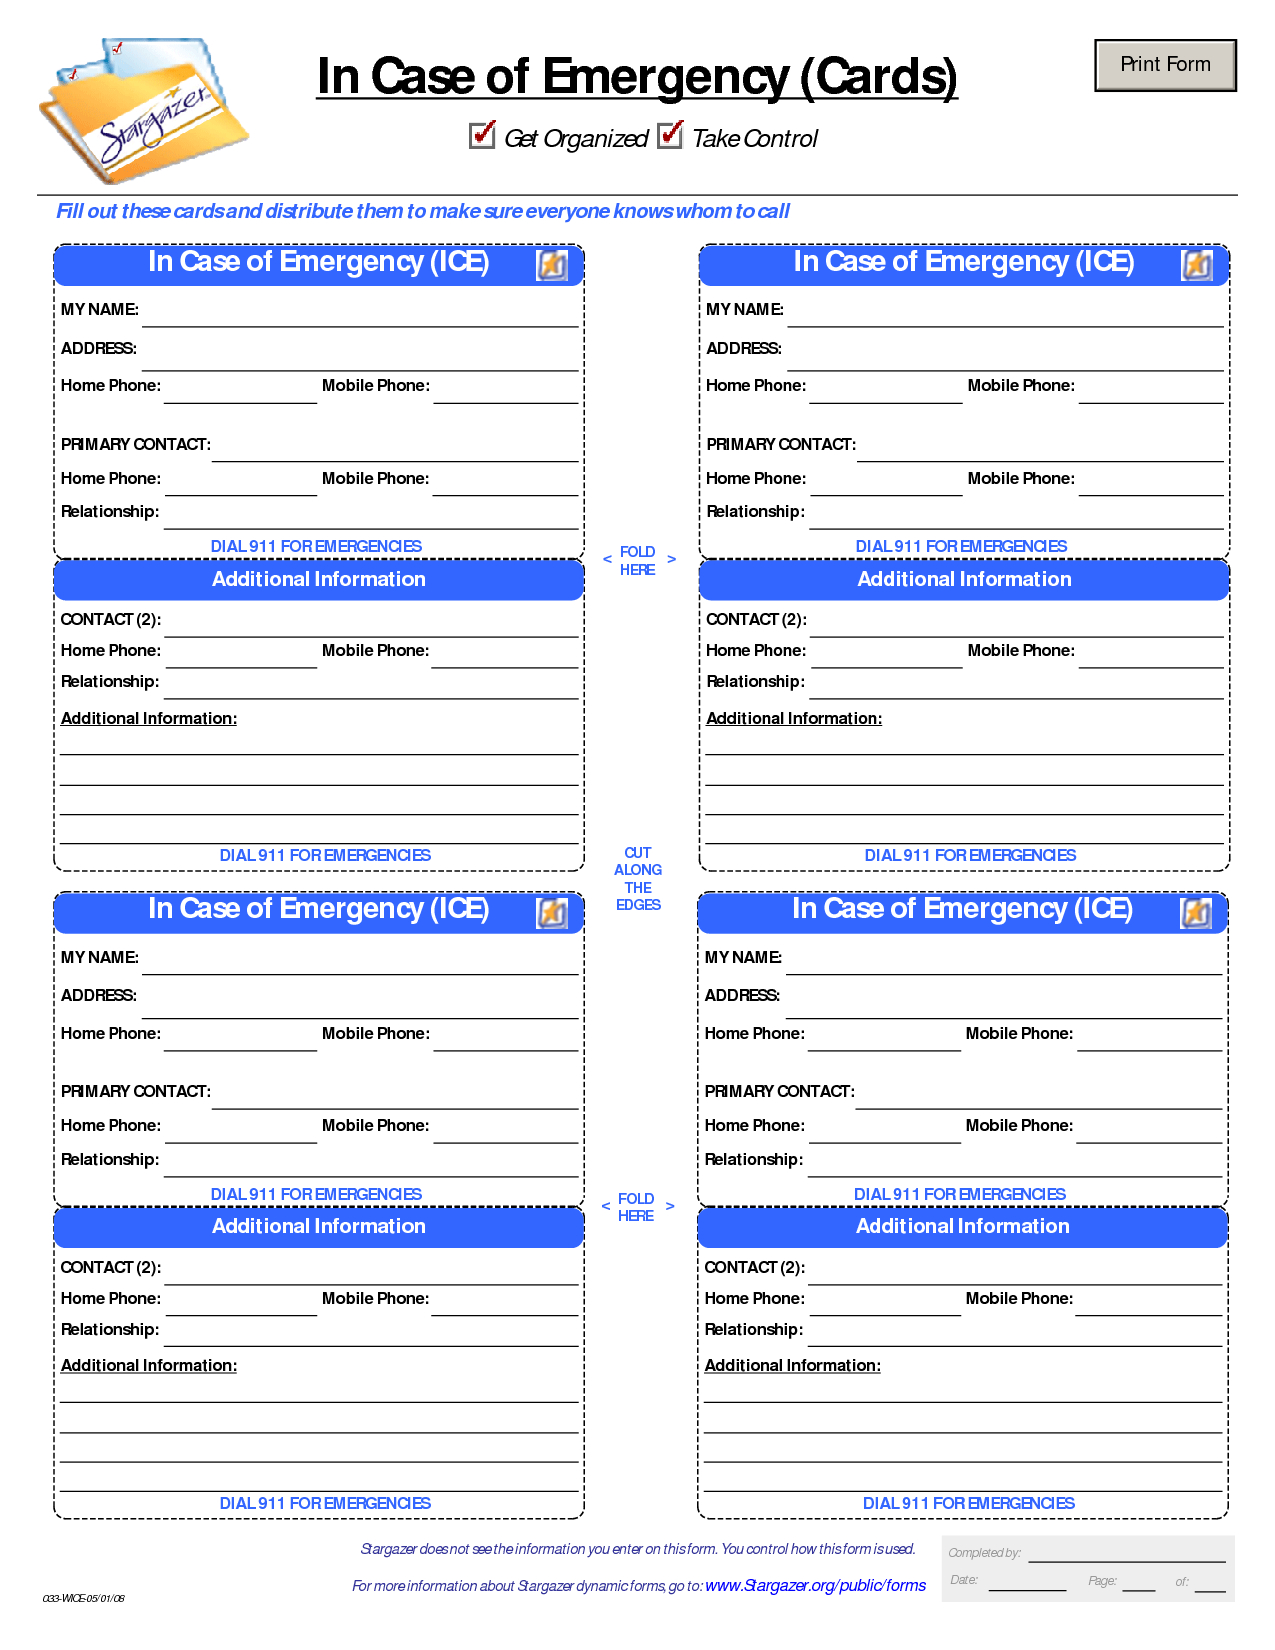 Id Card Template | In Case Of Emergency Cards | School | Id Regarding Emergency Contact Card Template